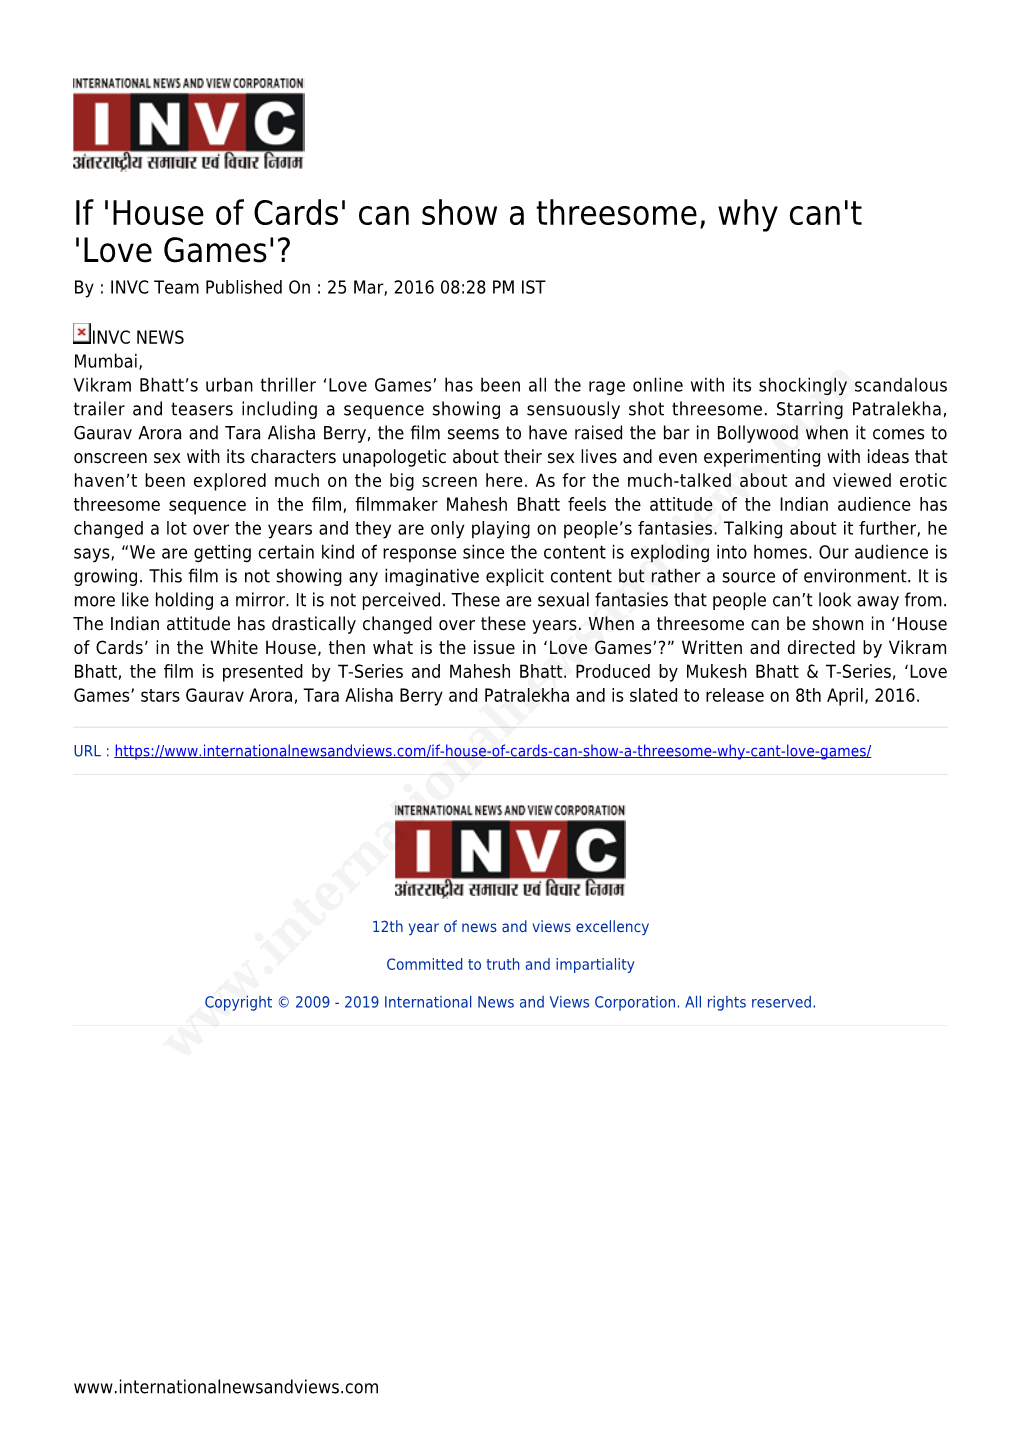 Can Show a Threesome, Why Can't 'Love Games'? by : INVC Team Published on : 25 Mar, 2016 08:28 PM IST